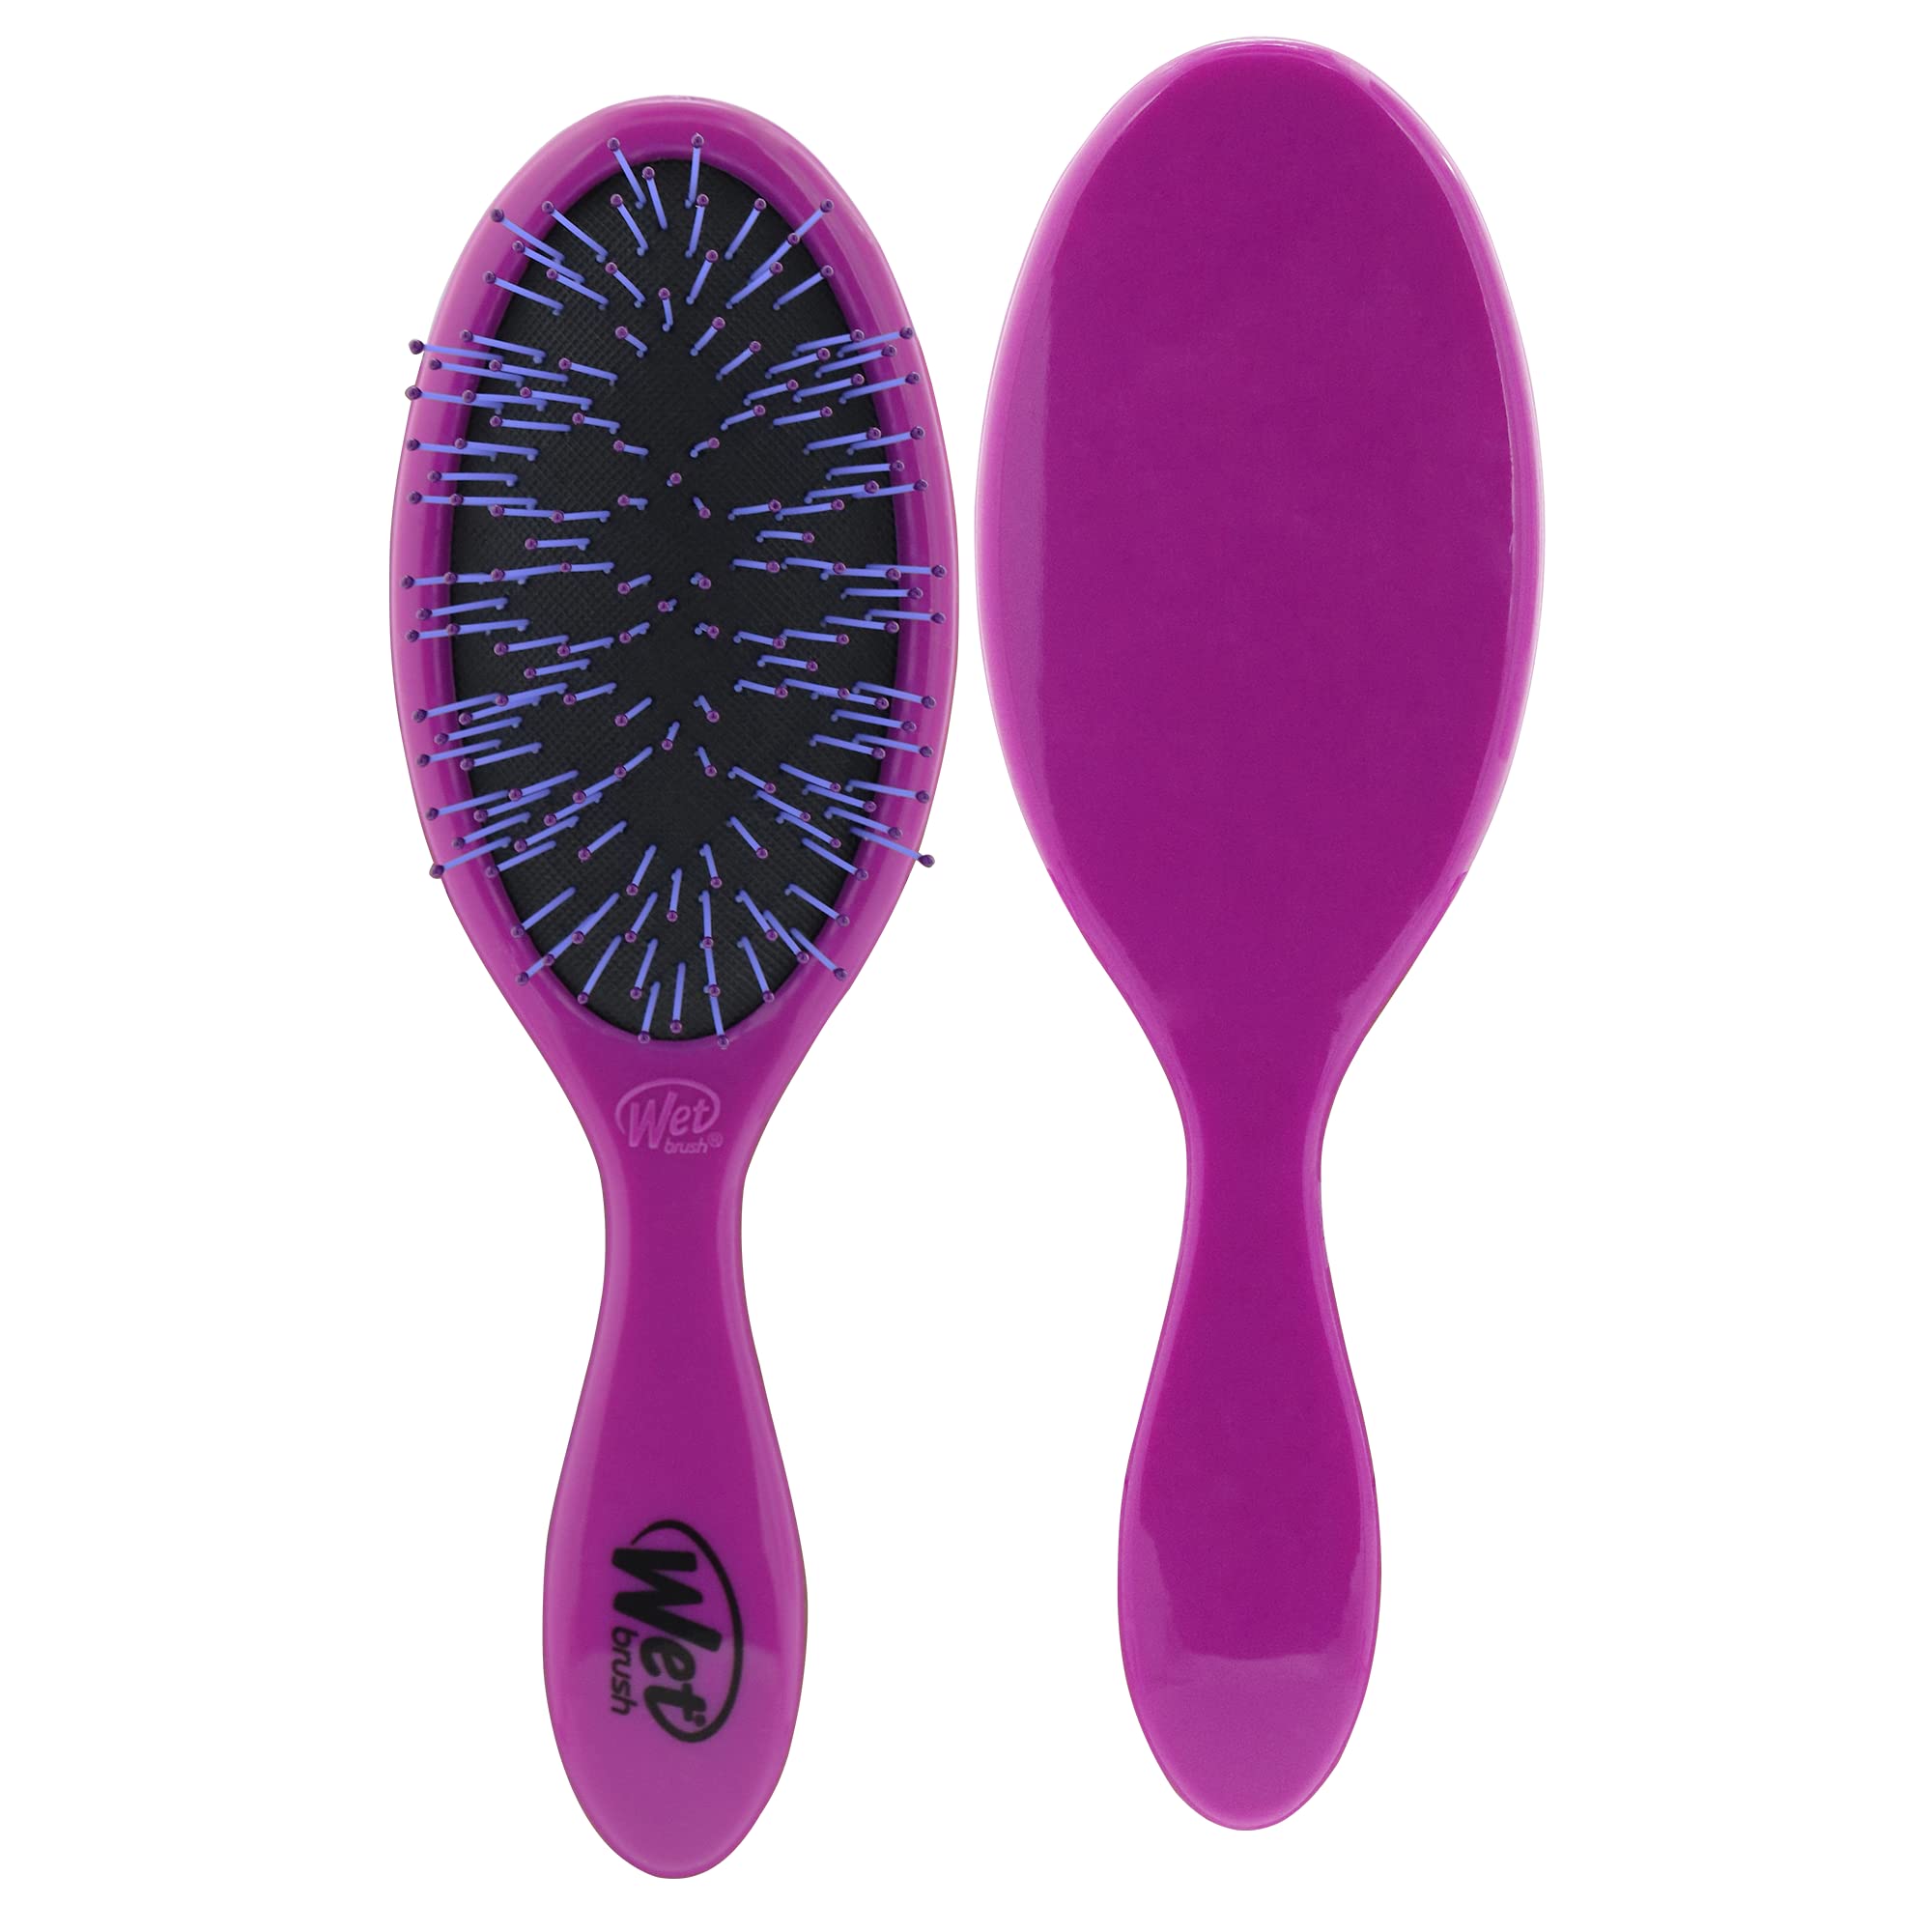 Wet Brush Thick Hair Detangling Brush, Purple - Detangler Brush with Soft & Flexible Bristles in a Unique Cluster Pattern - Tangle-Free Brush - For Thick, Curly, & Coarse Hair - For Women & Men